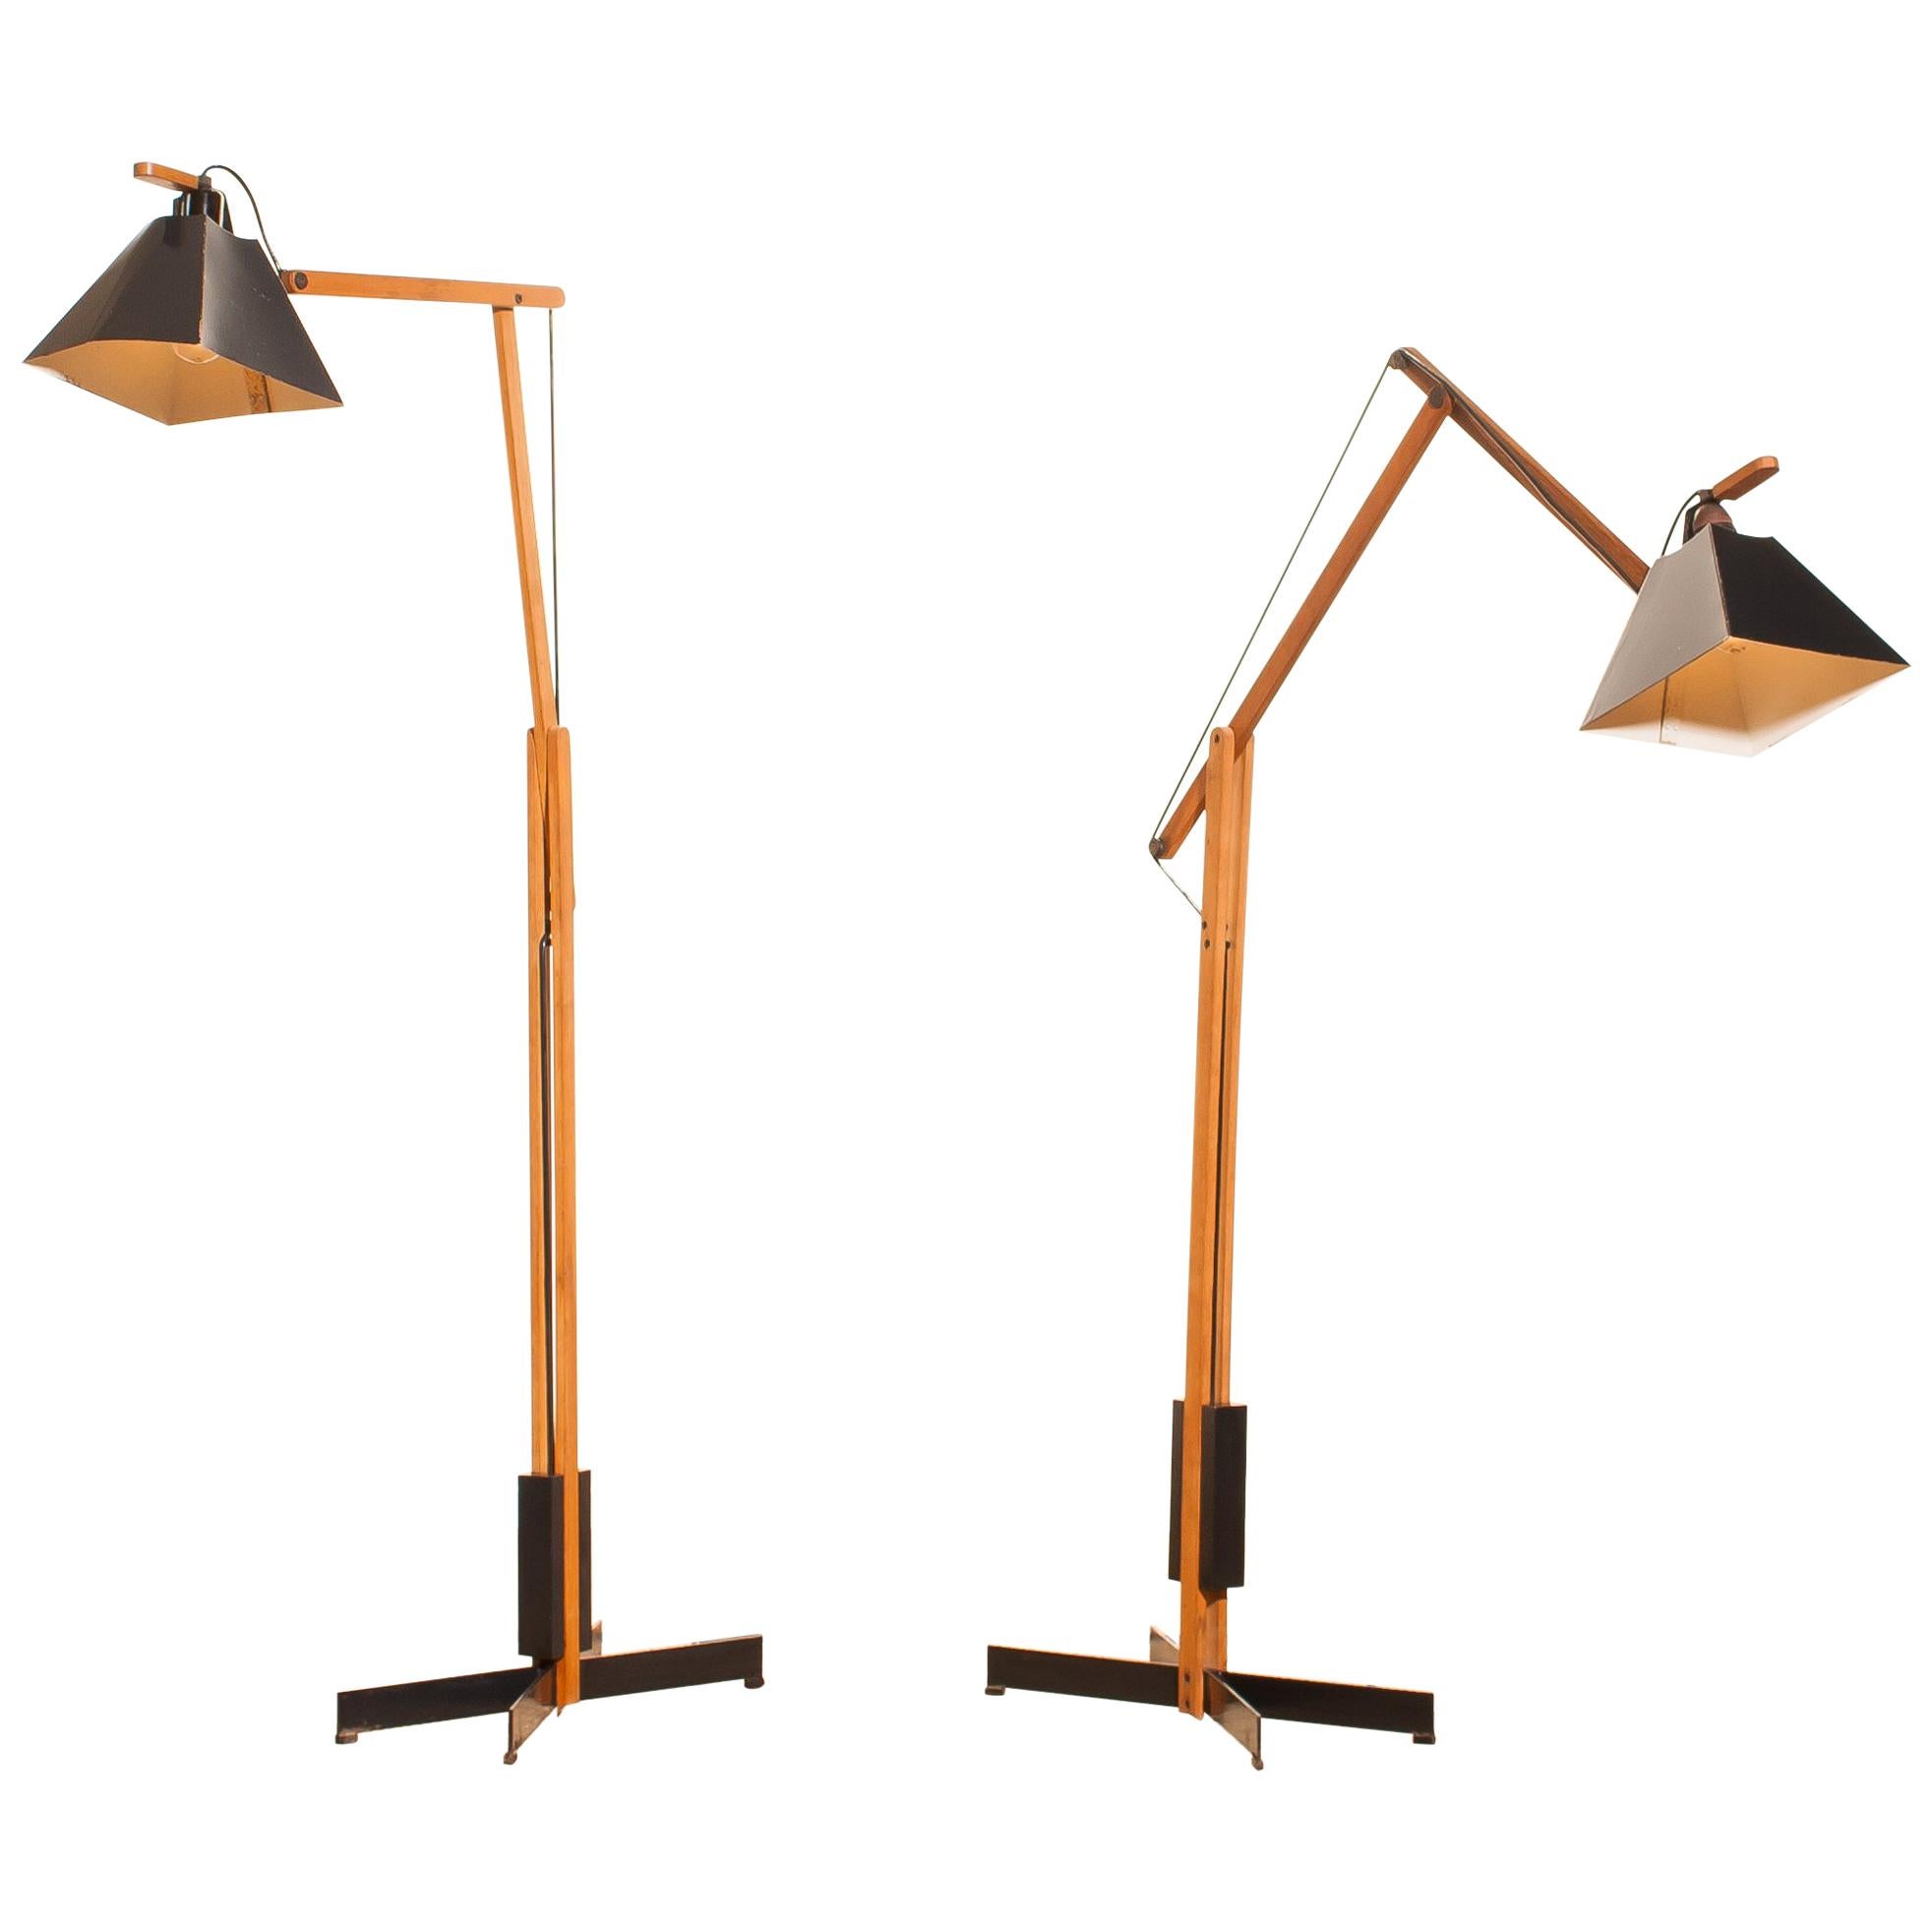 1950s, a Pair of Very Rare Teak and Metal Floor Lamps by Luxus